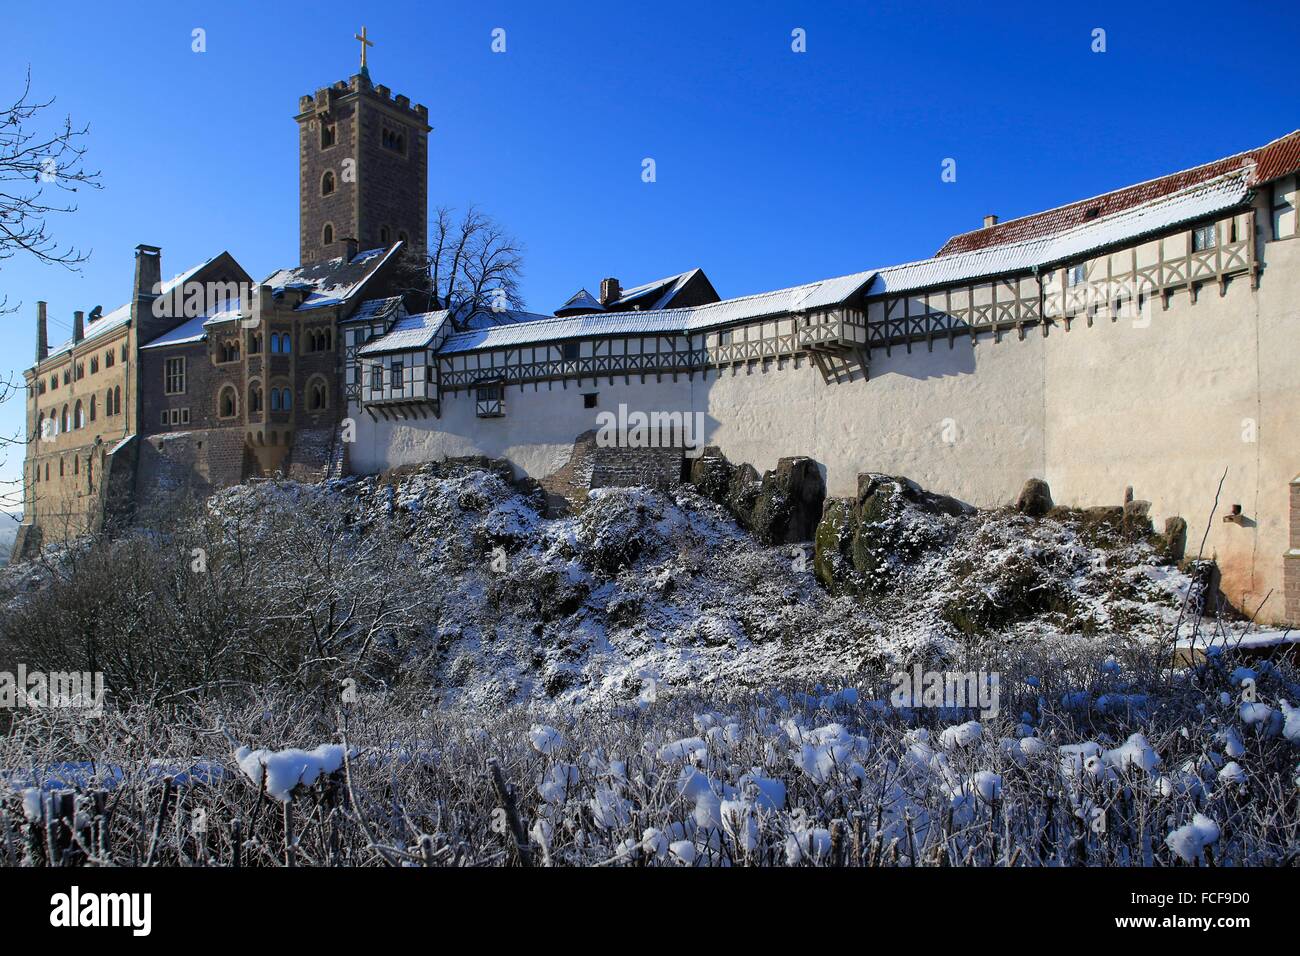 The Wartburg in Eisenach was founded around 1067. Since 1999 it is a World Heritage Site. The Wartburg became famous through the Thuringian countess Elisabeth and Martin Luther. Date: January 19, 2016 Stock Photo